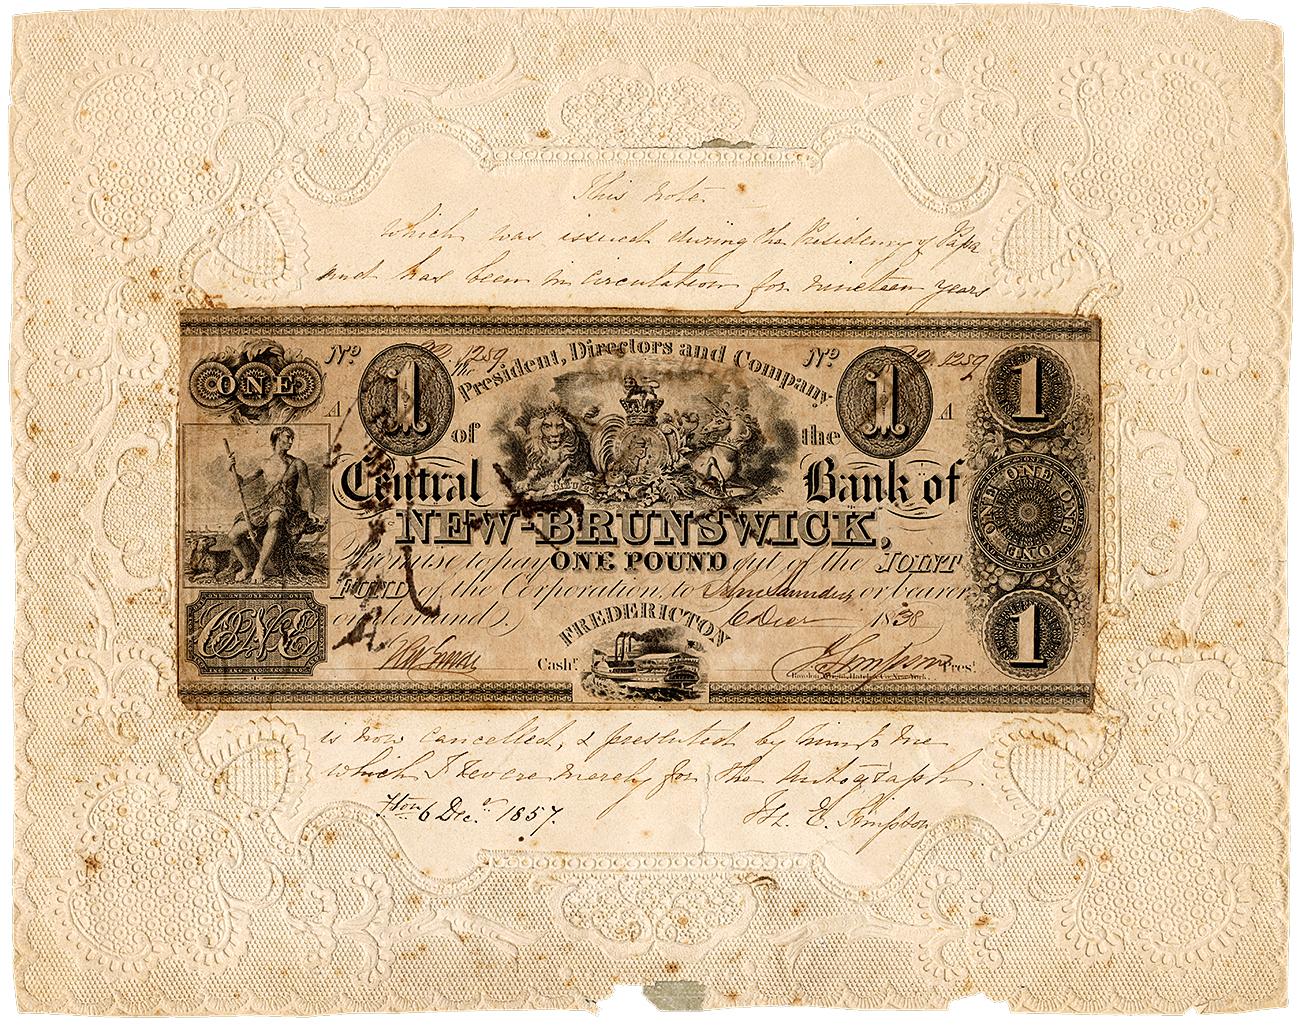 Bank note, geometric designs, allegorical figures, pasted on a doily with handwriting on it.